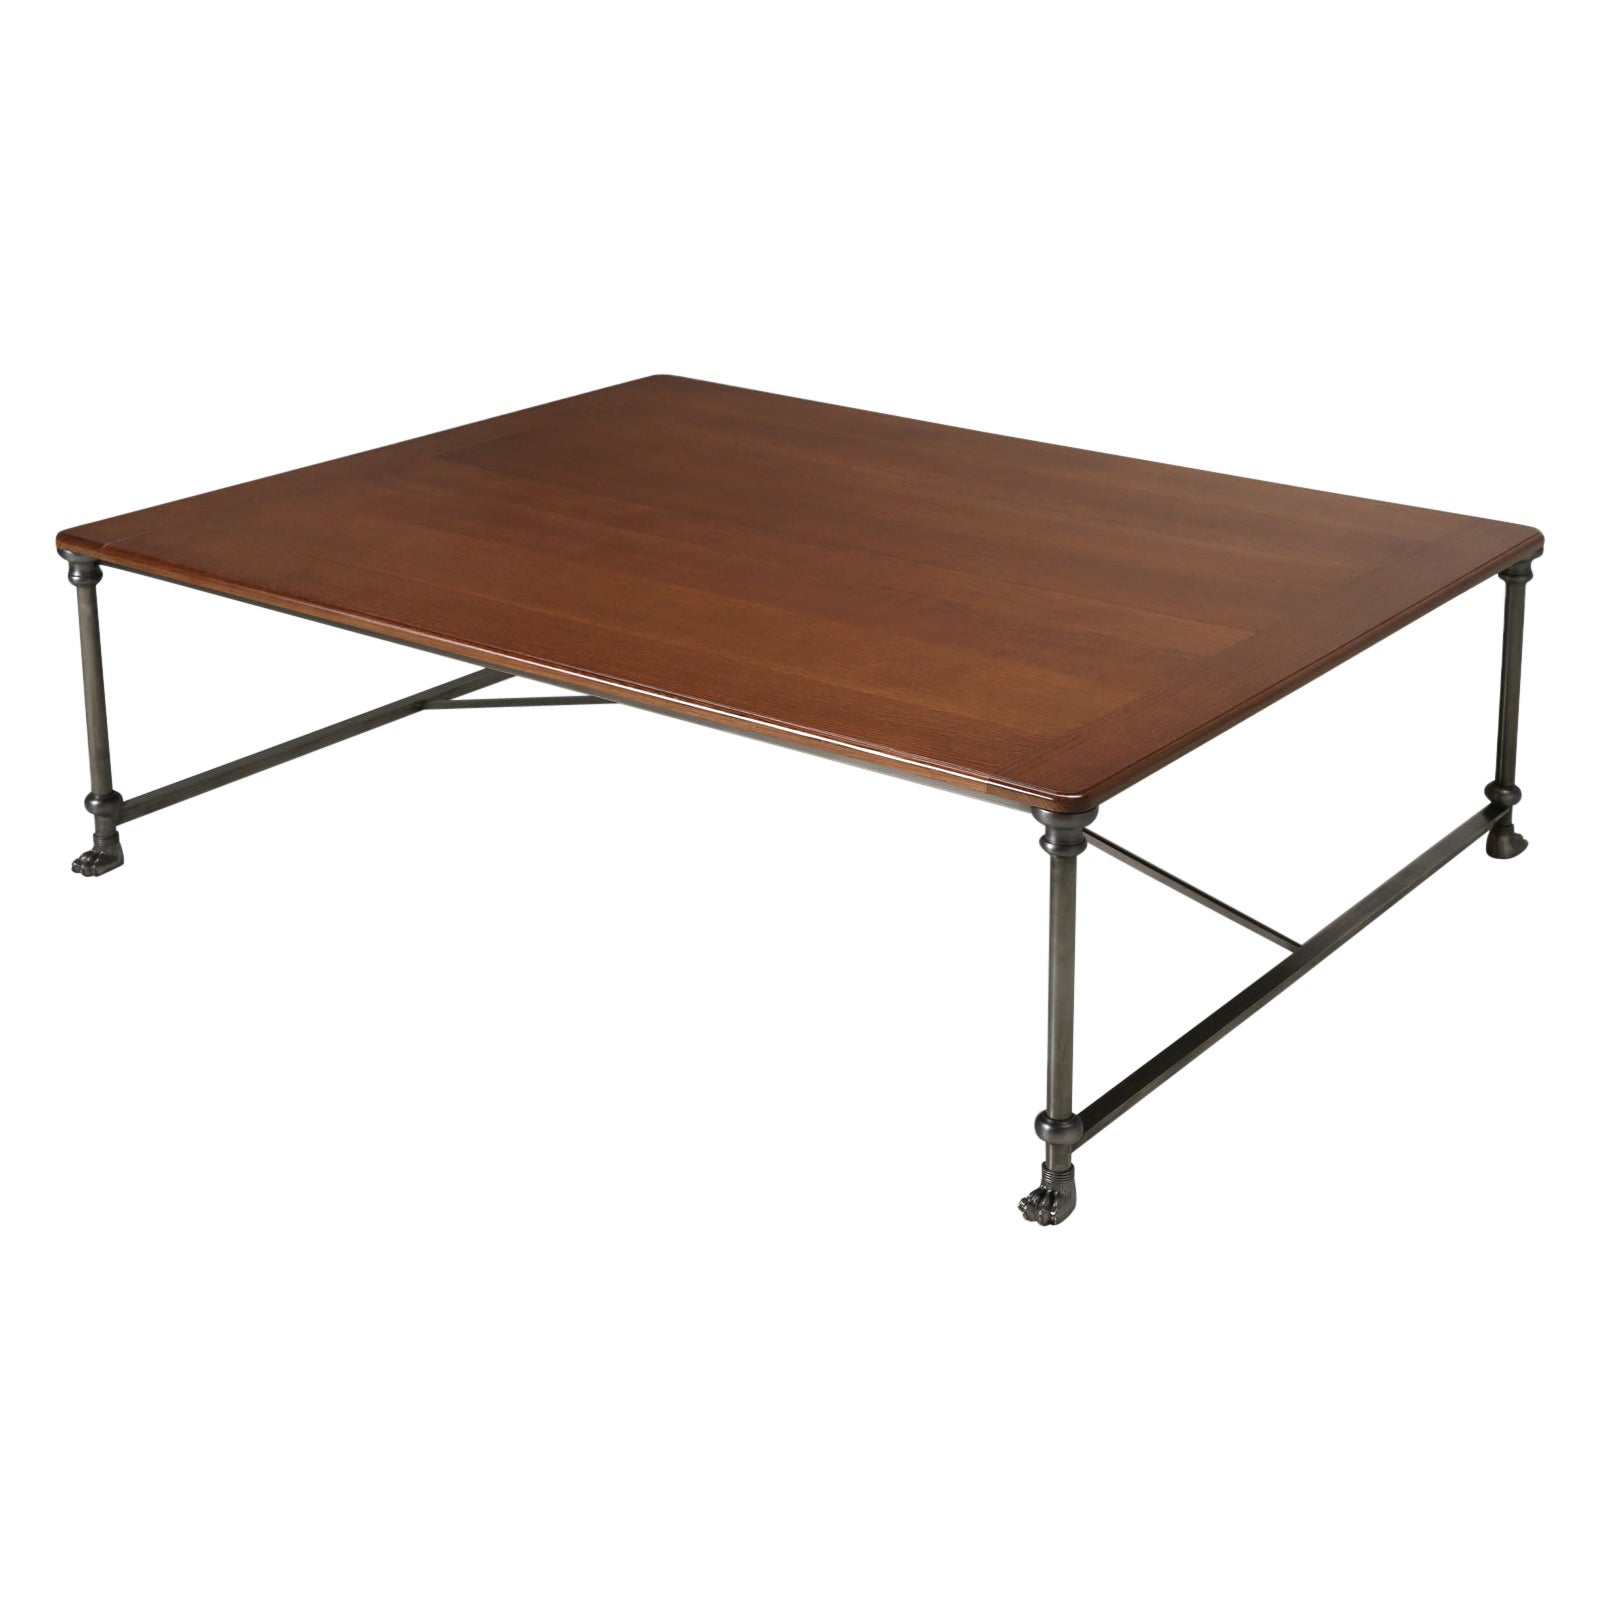 French Industrial Inspired Coffee Table in Stainless Steel Any Dimension, Finish For Sale